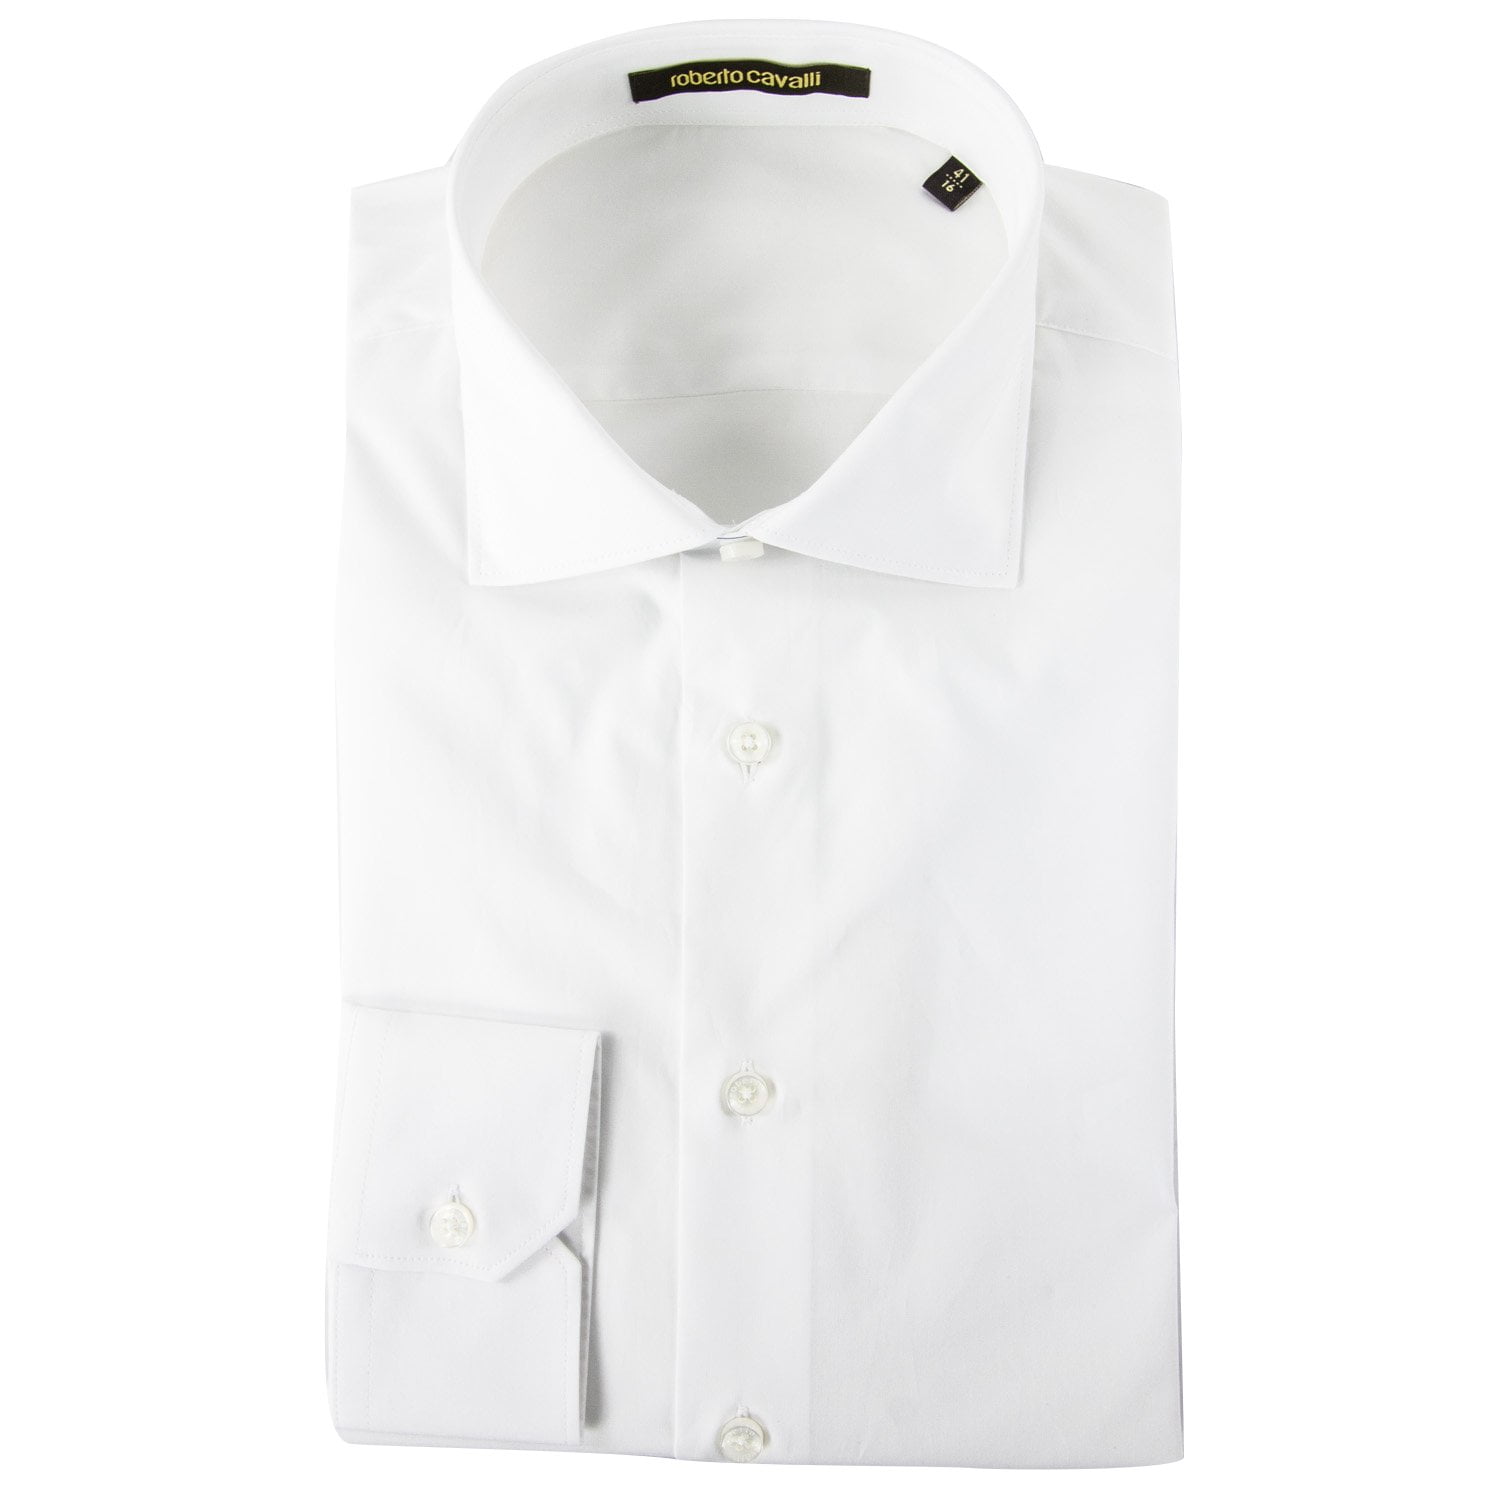 G111 Gino Giovanni Formal White Dress Shirt for Boys From Baby to Teen 